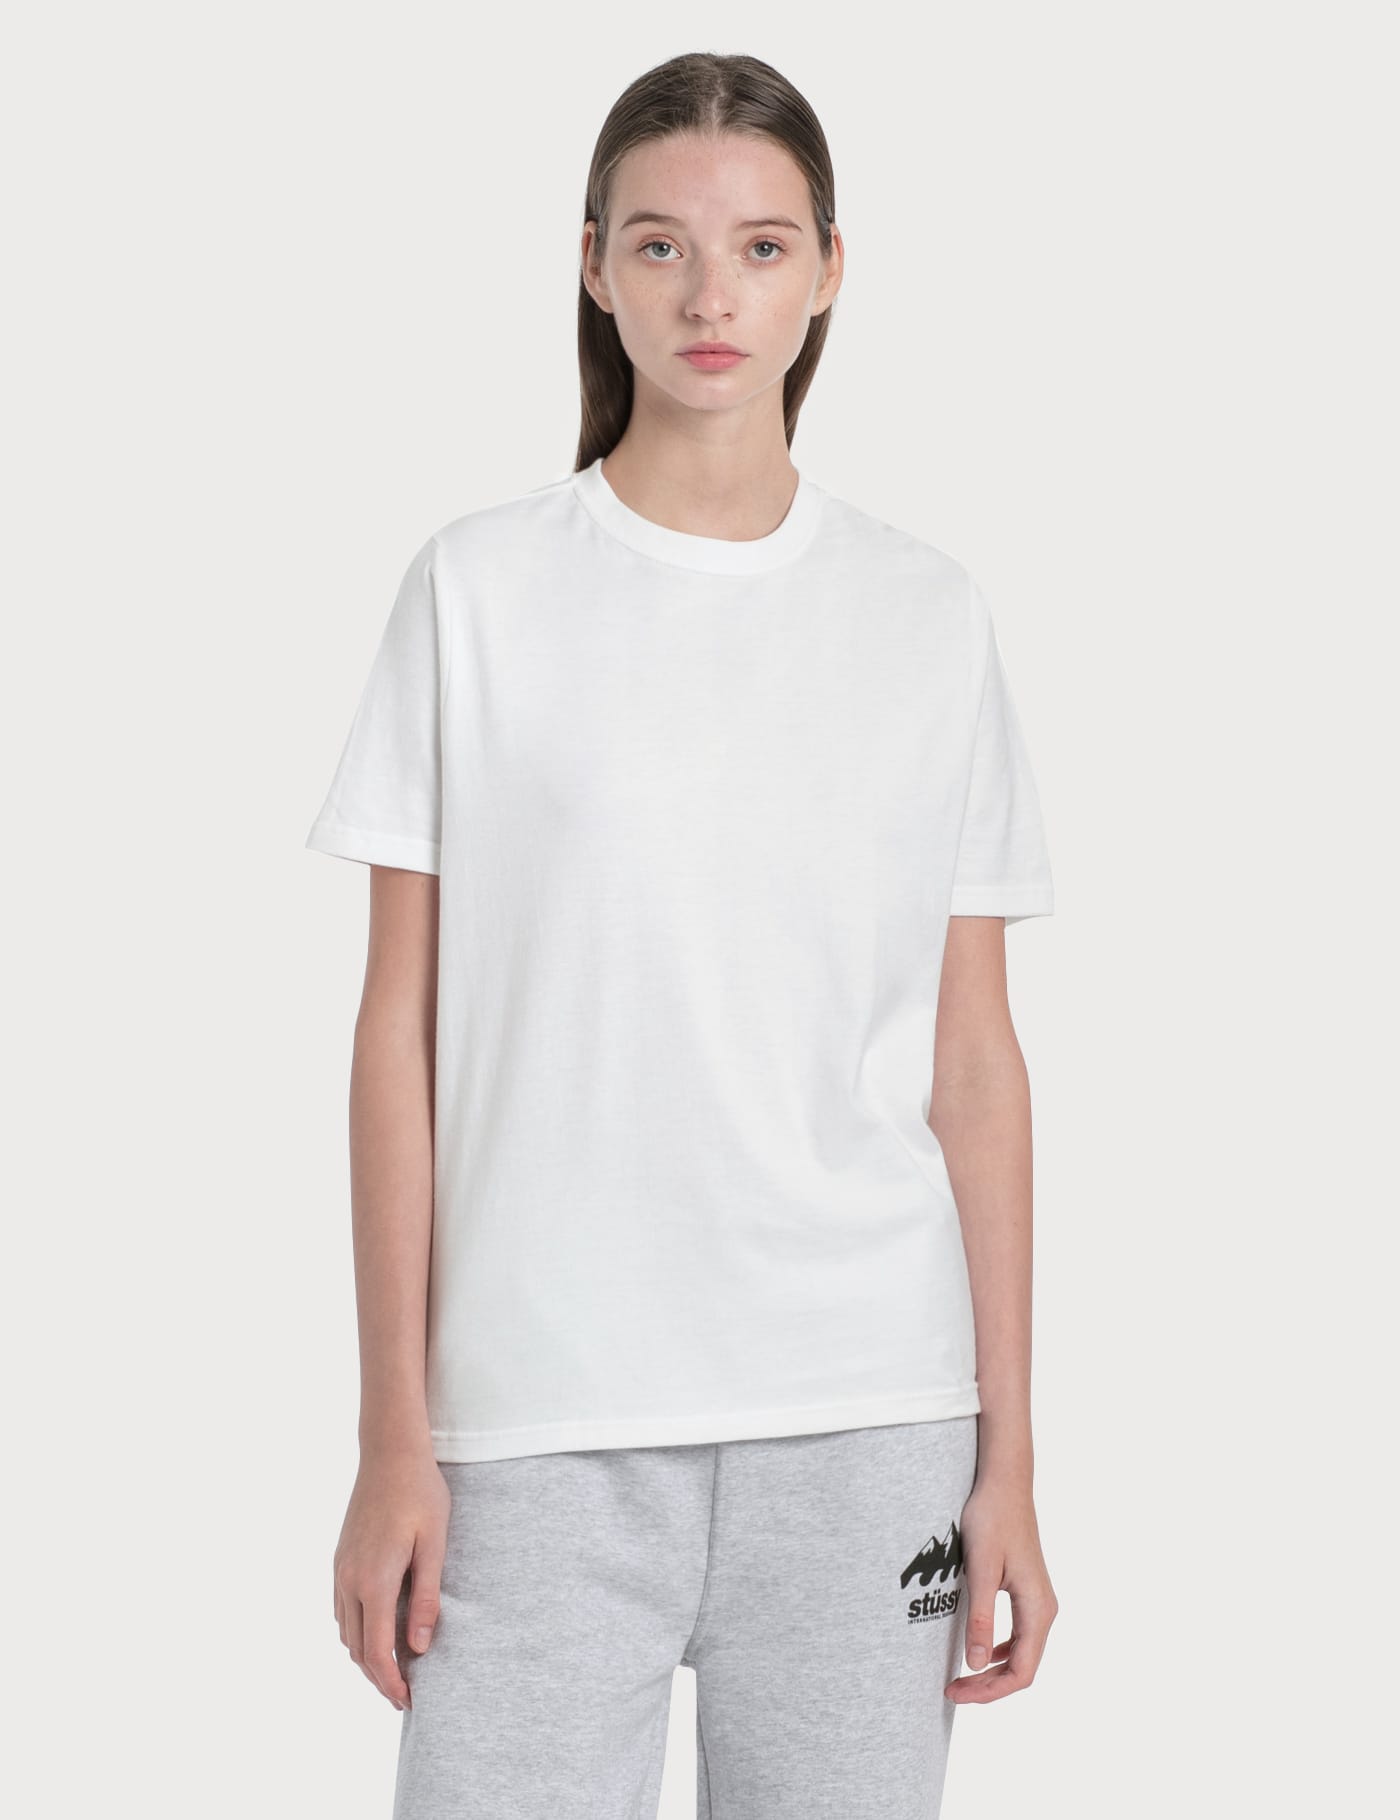 Stüssy - Smooth Stock T-Shirt | HBX - Globally Curated Fashion and